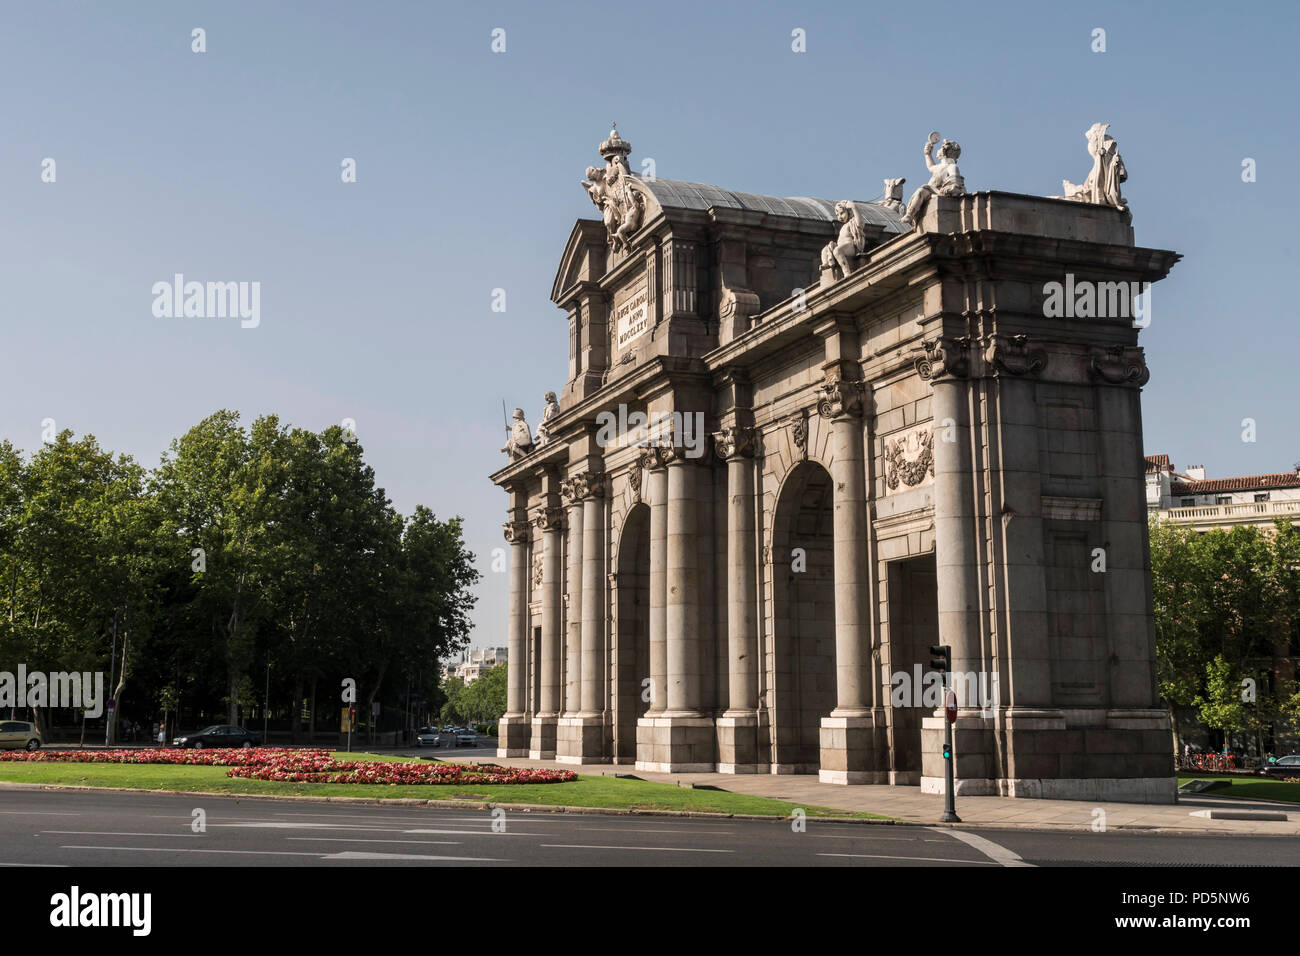 Madrid, Spain - August 4 2018:  Alcala Gate or Puerta de Alcala is a monument in the Plaza de la Independencia in Madrid, Spain Stock Photo